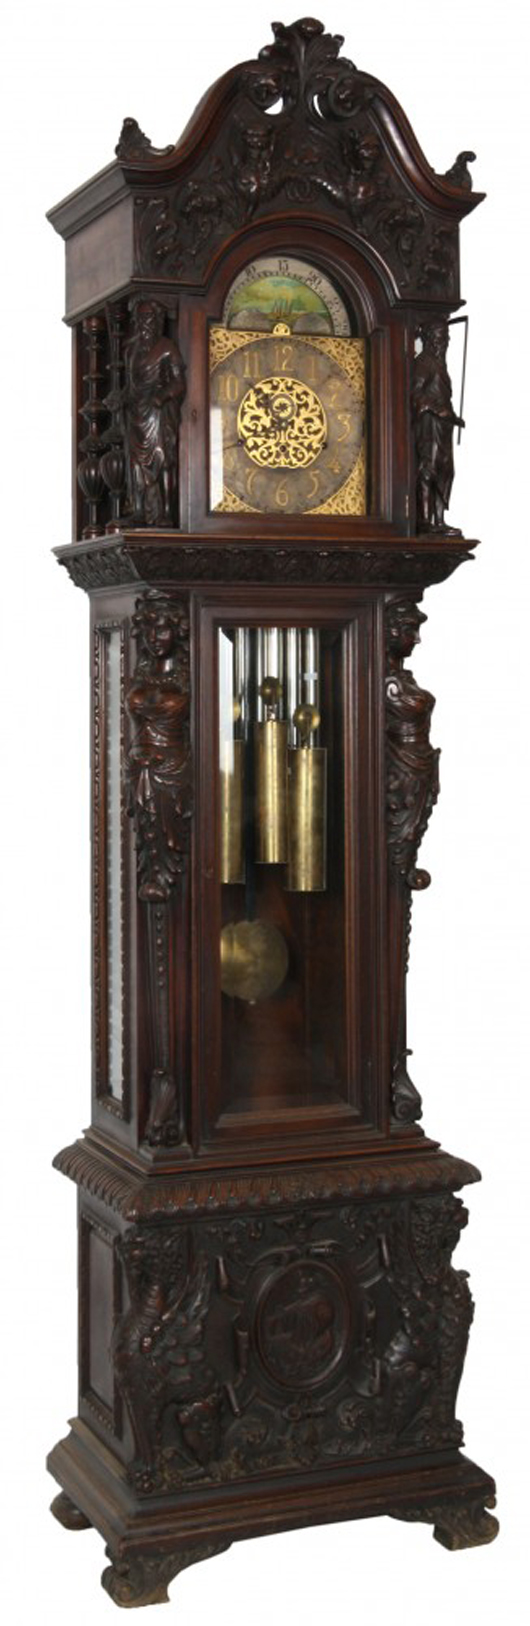 Carved mahogany nine-tube grandfather clock with fine case attributed to R.J. Horner. Price realized: $44,250. Fontaine’s Auction Gallery image.